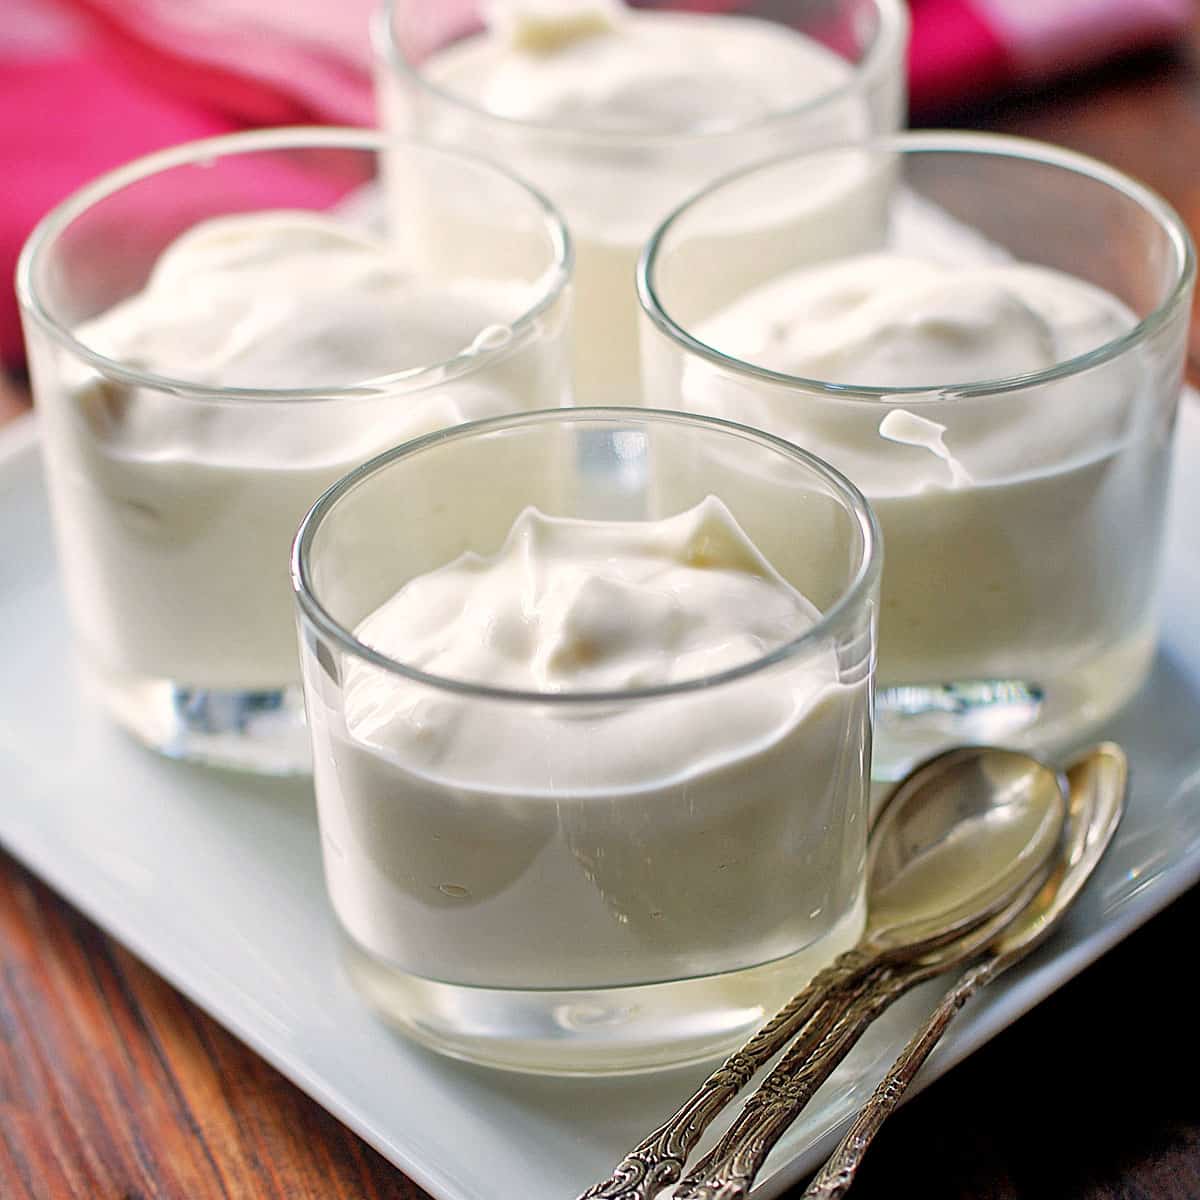 Ricotta Dessert served in glass cups with spoons.